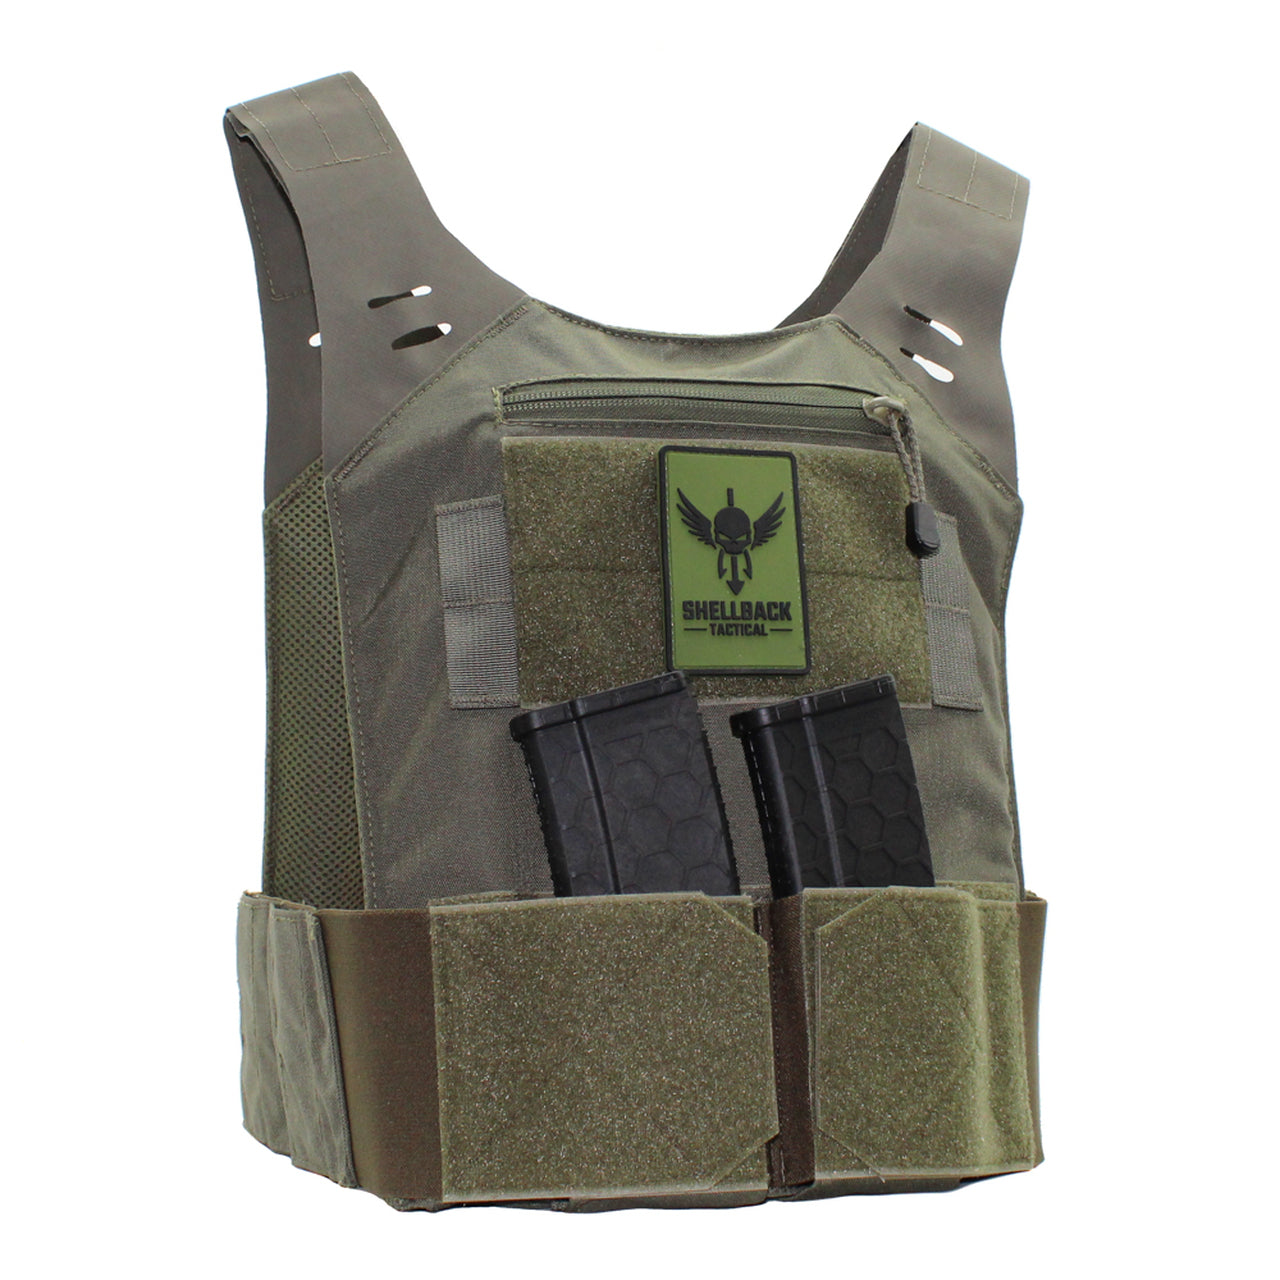 A Shellback Tactical Stealth Low Vis Plate Carrier with two magazines on it.